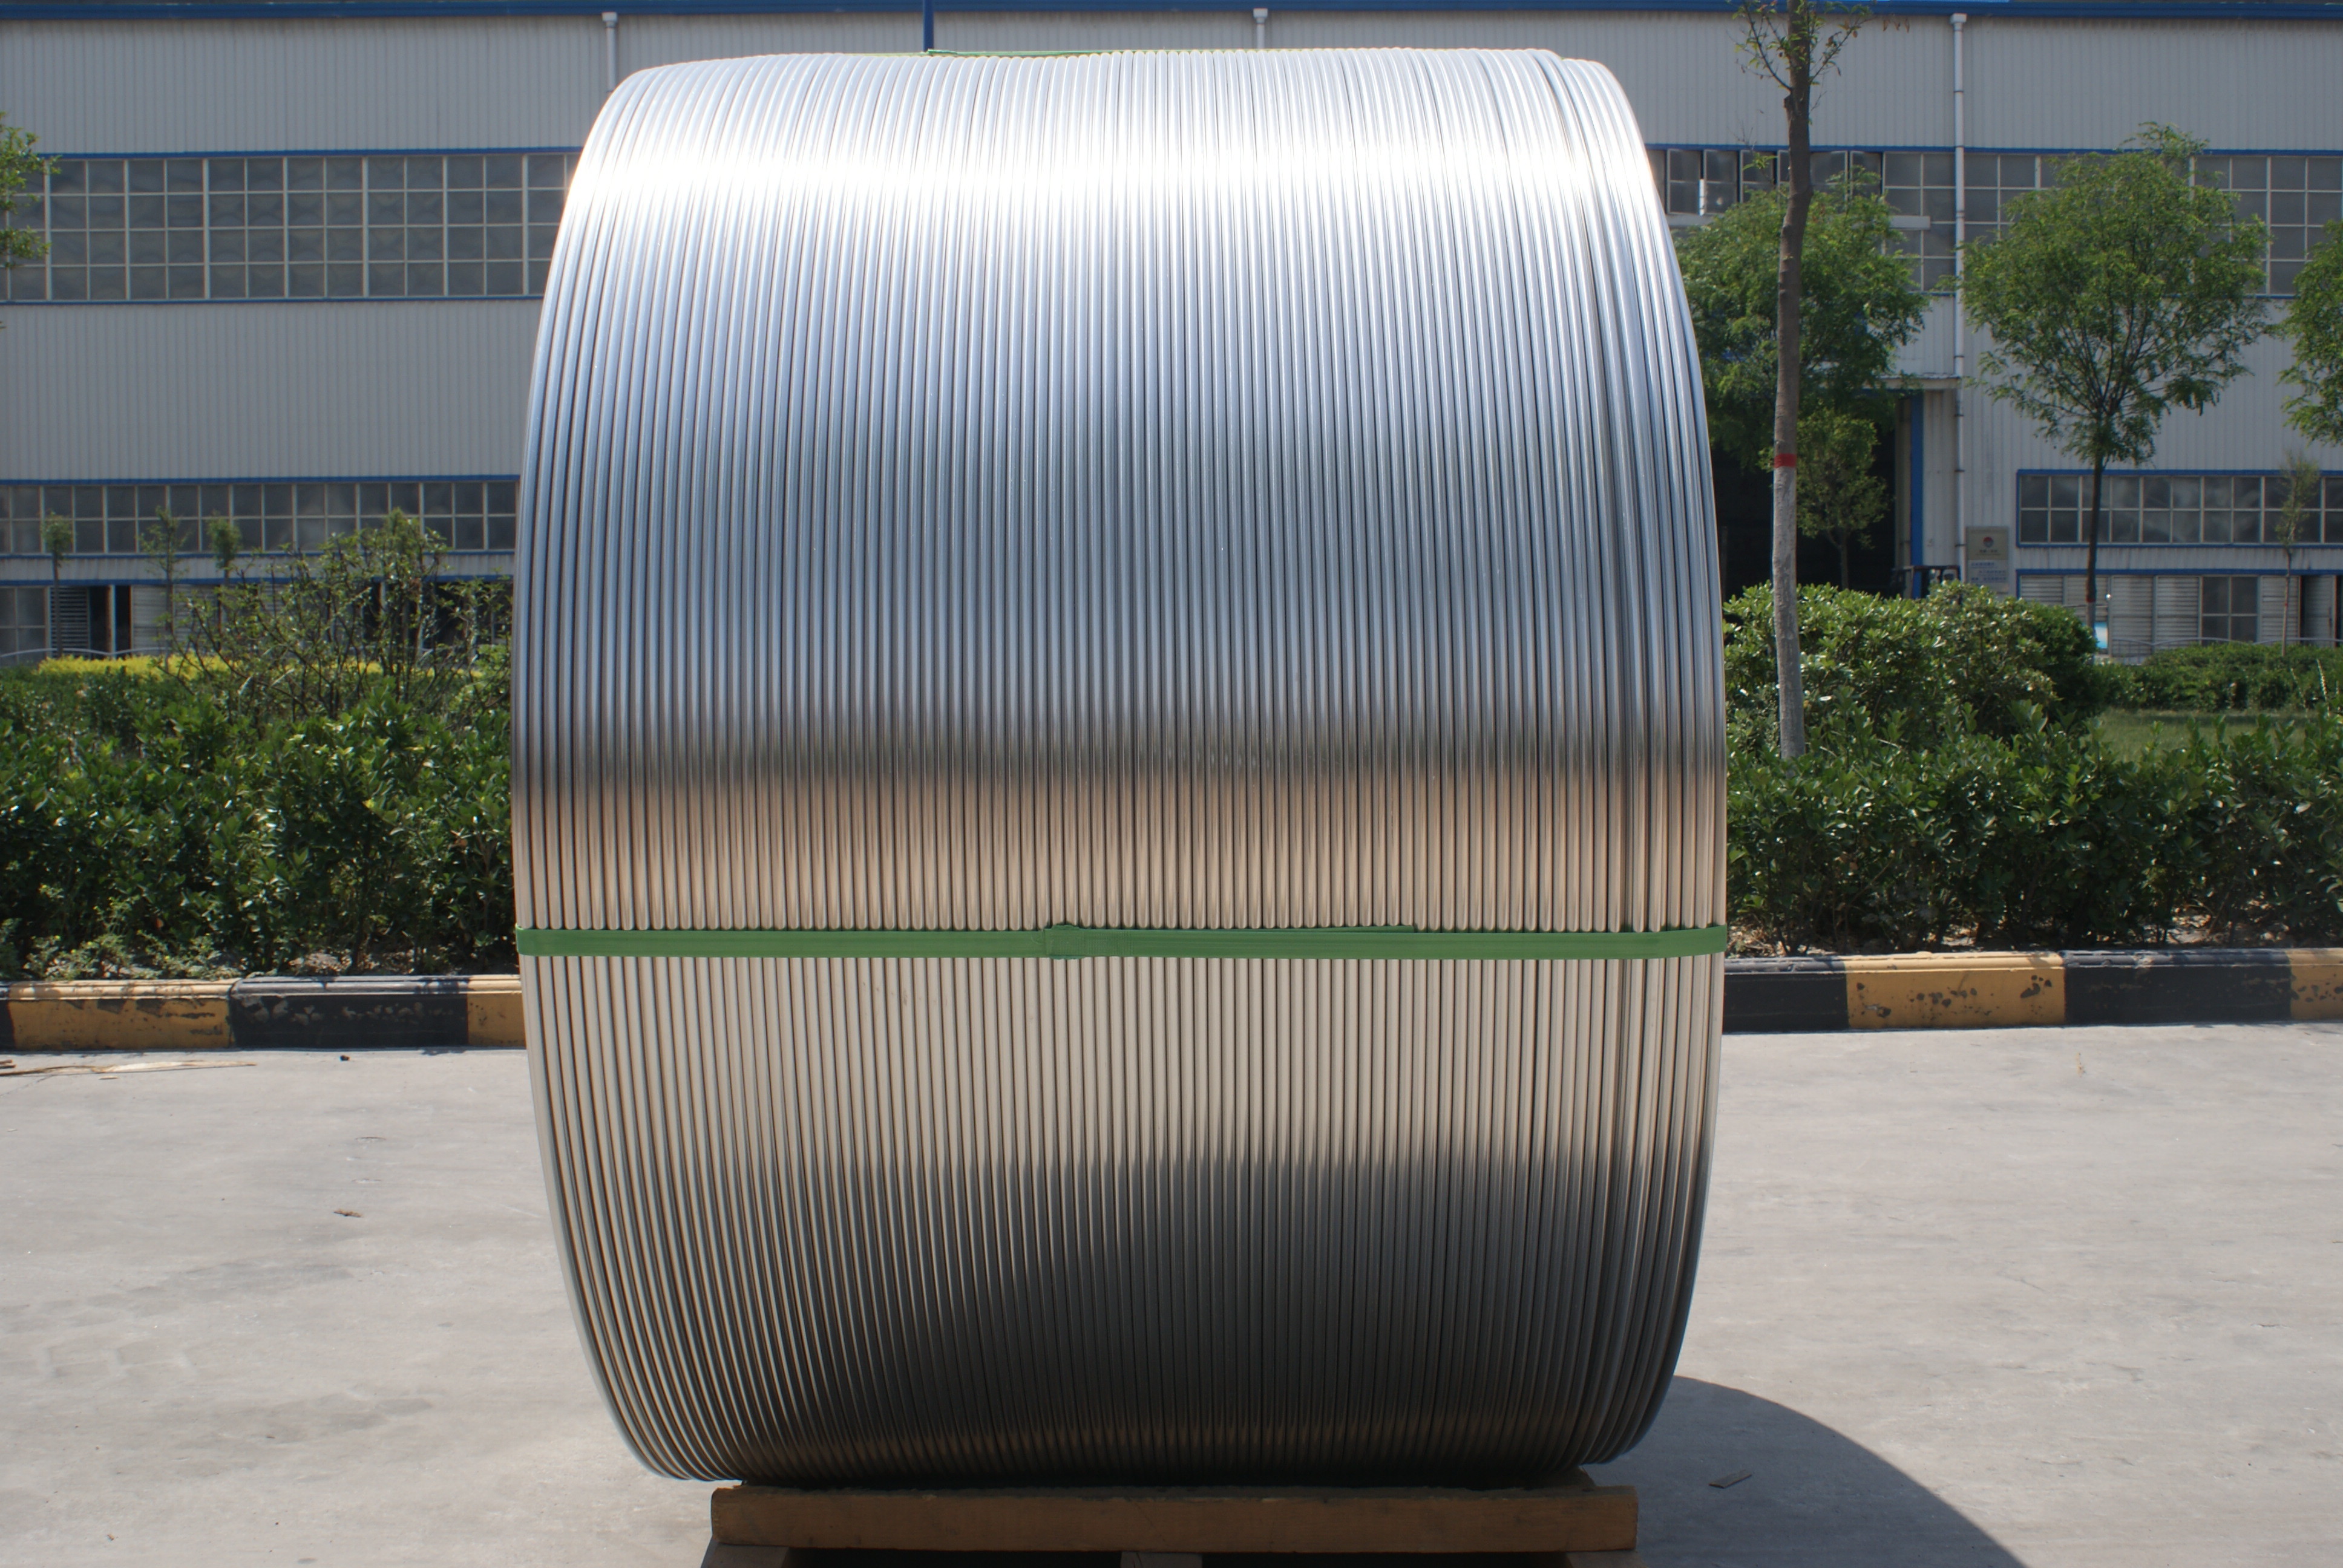  99.7% Purity Aluminium Wire Rod 9.5mm For Electrical Purpose Manufactures